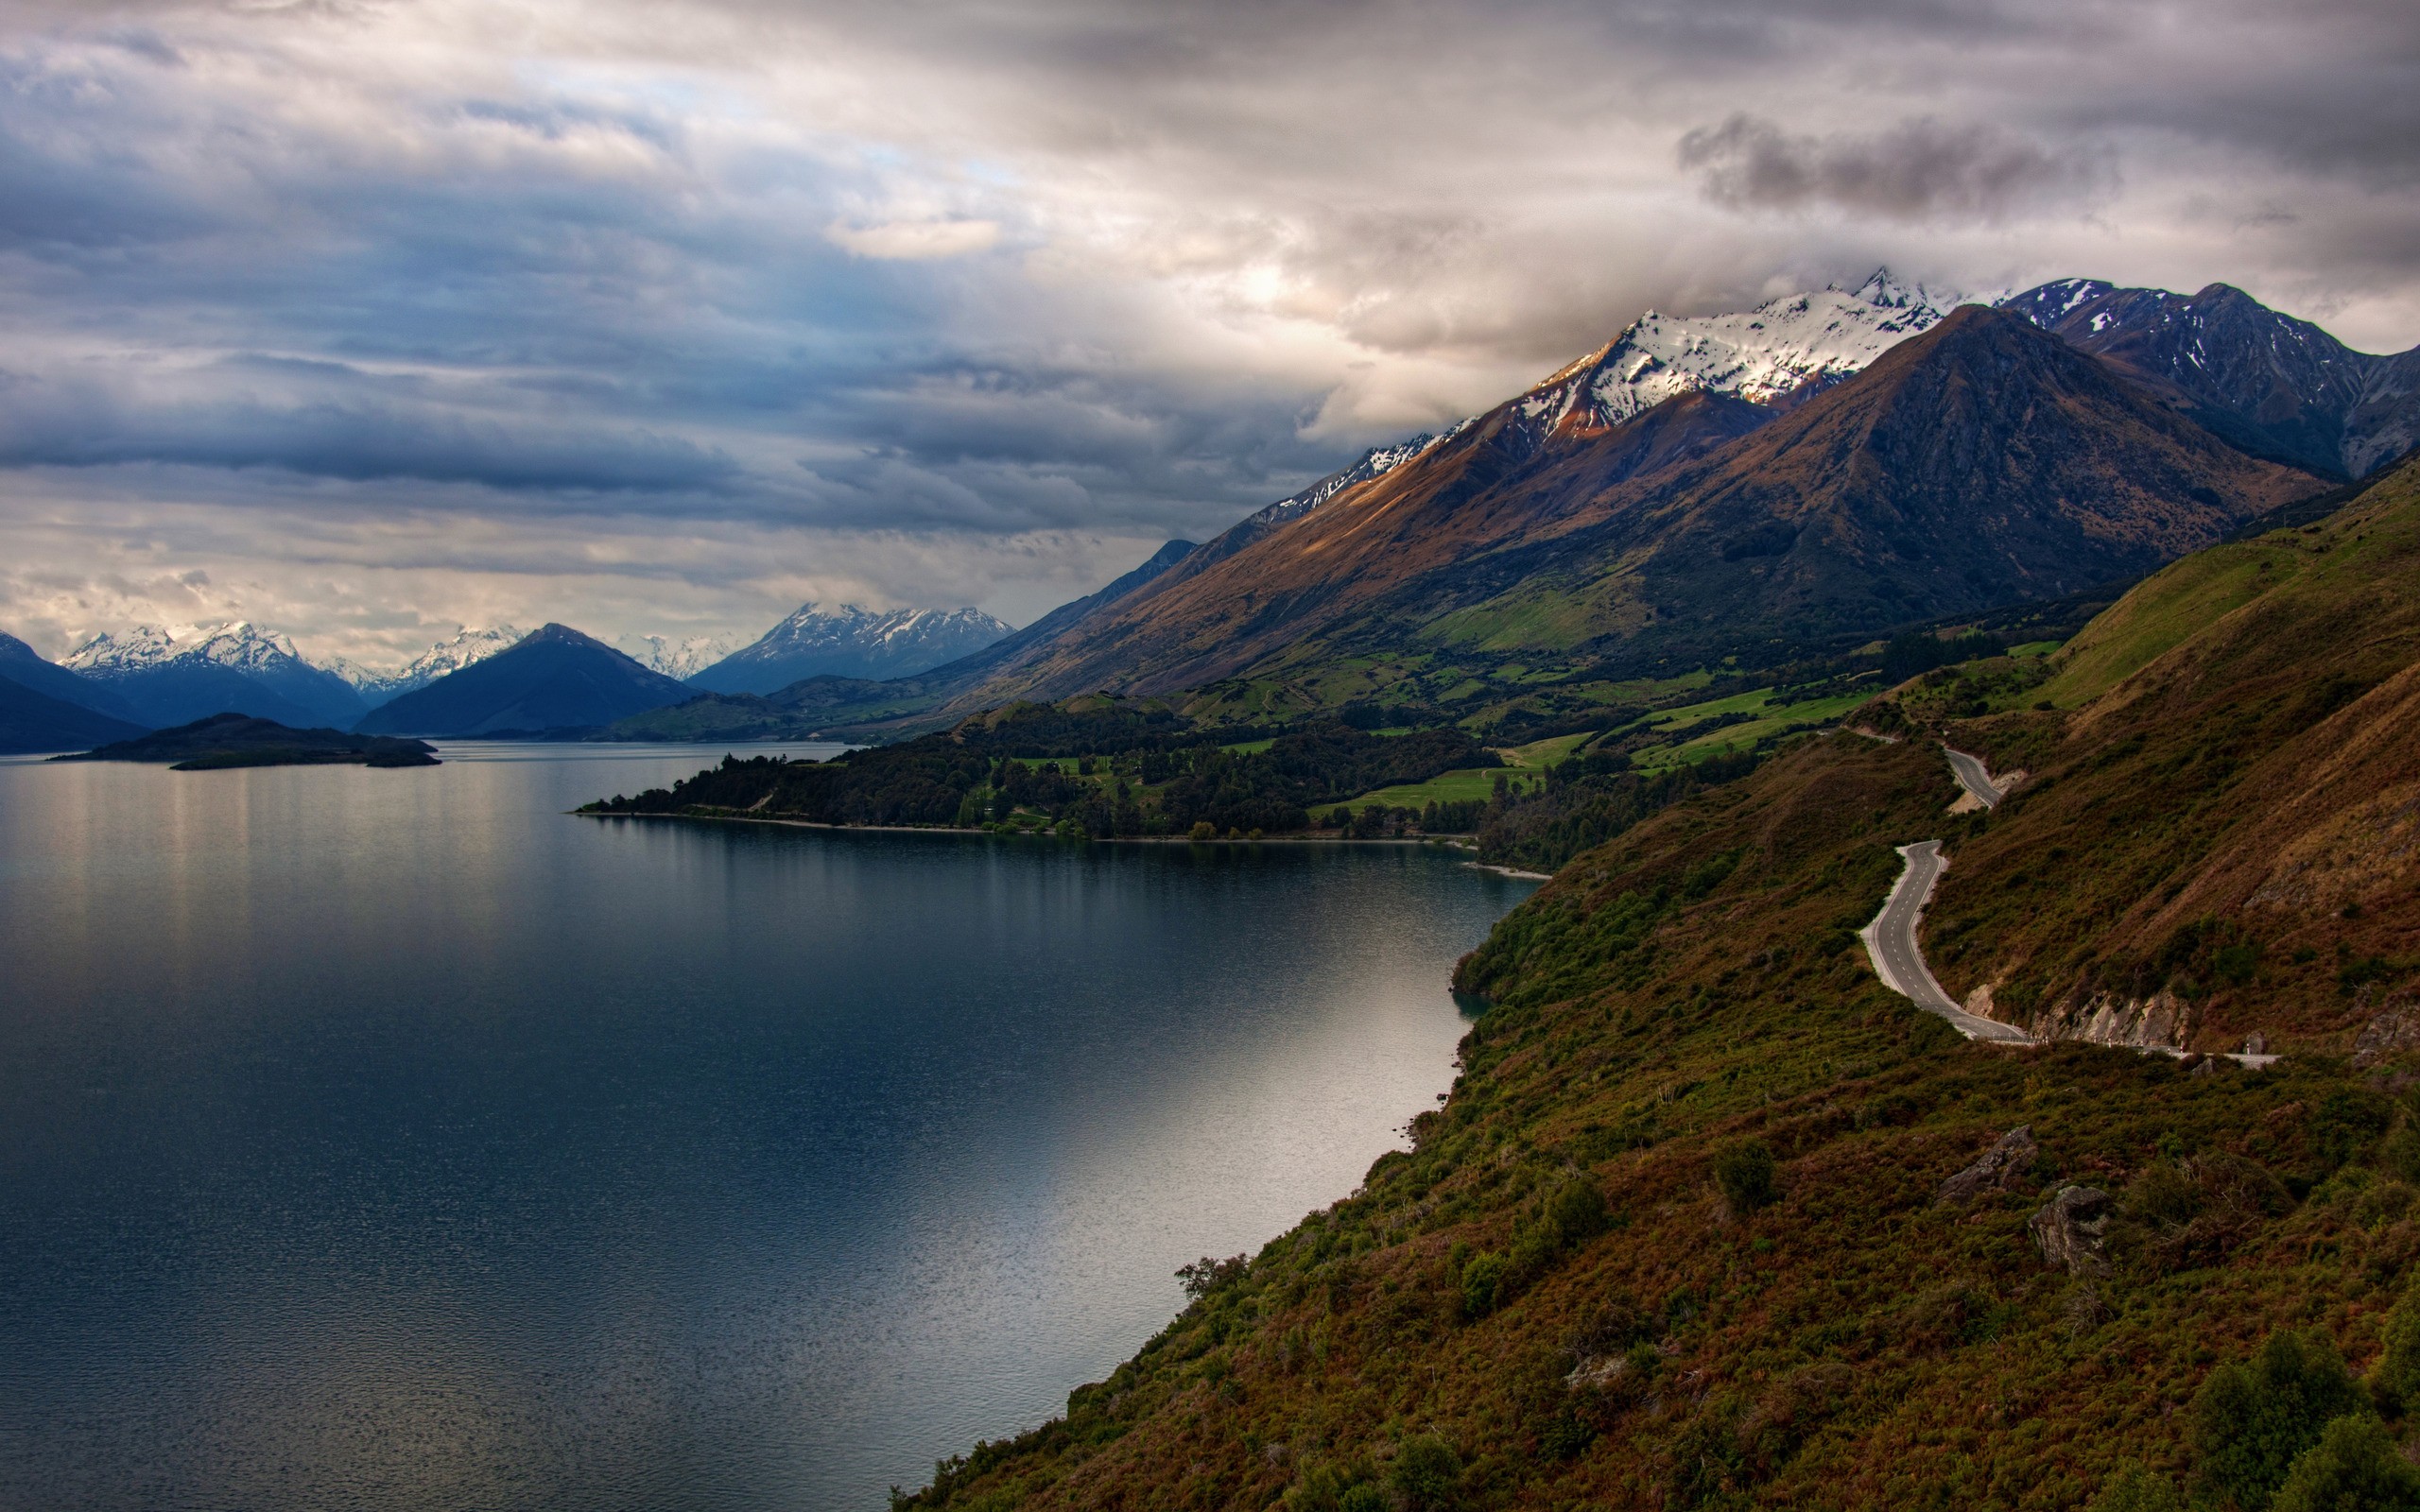 General 2560x1600 landscape nature lake mountains overcast New Zealand snowy mountain snowy peak